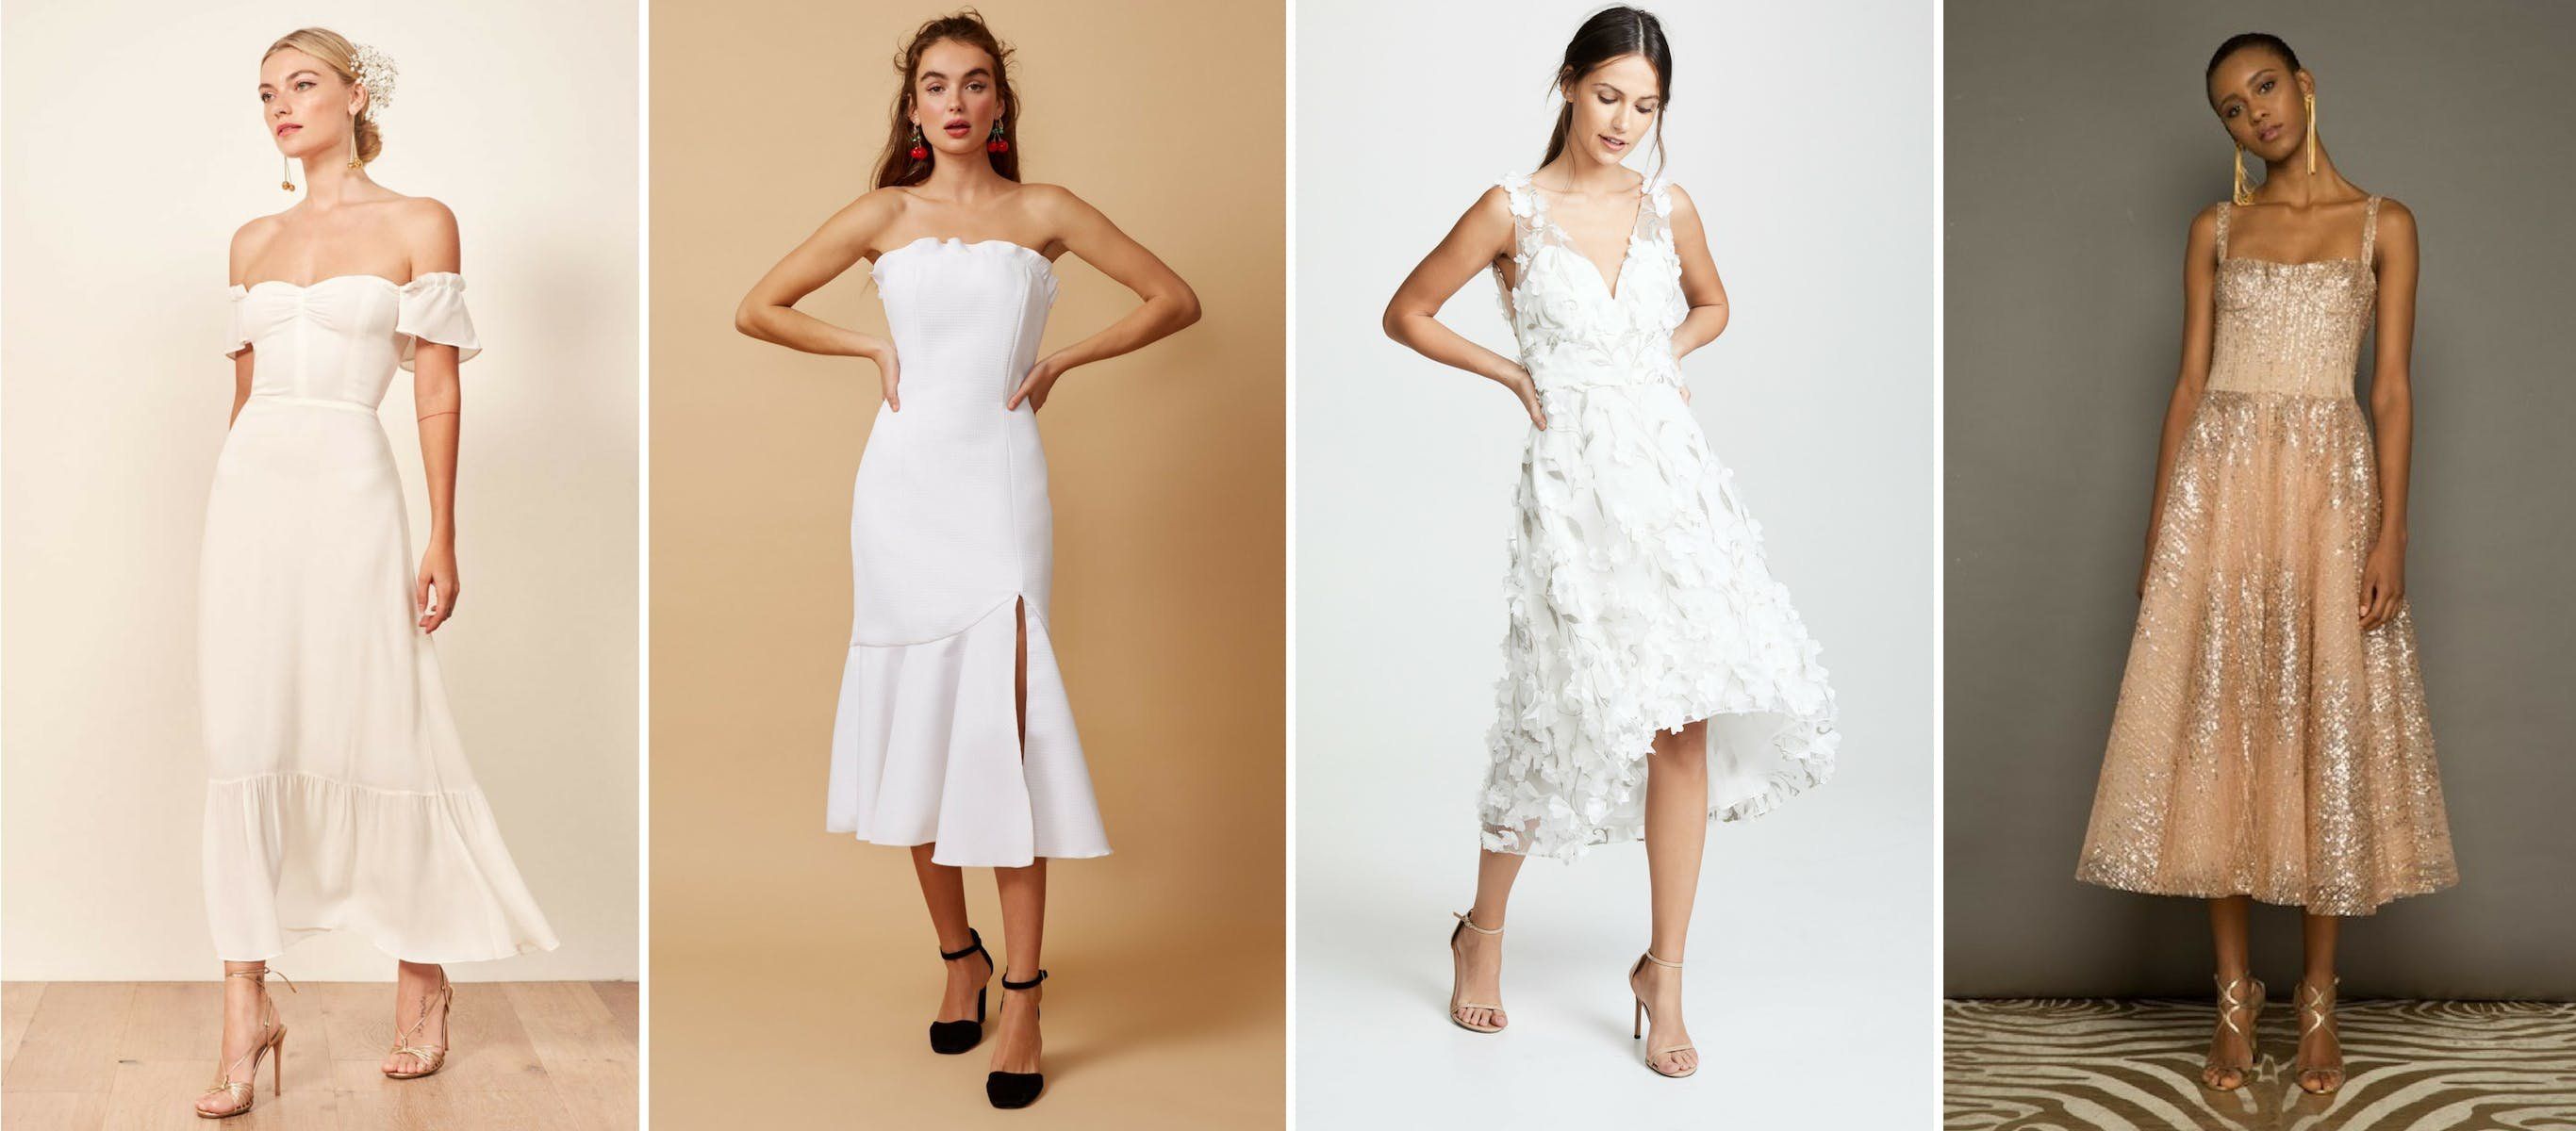 white dresses for bride at reception